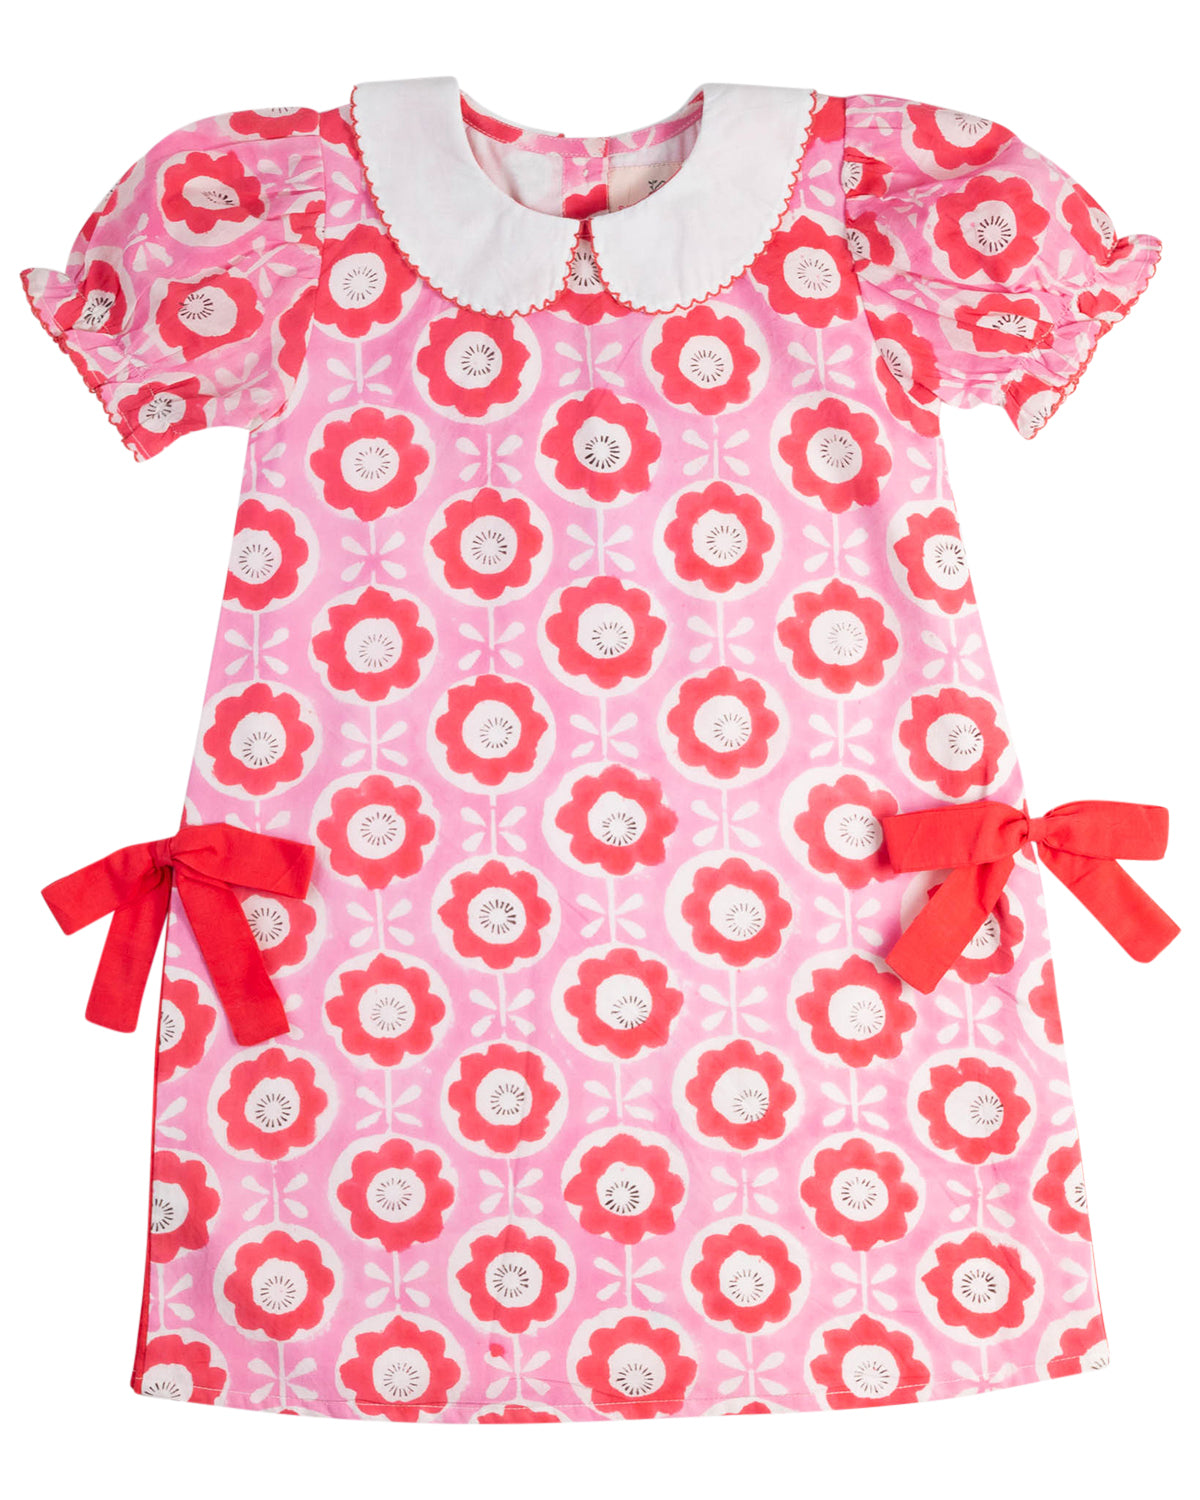 Pink Retro Dress with Bows